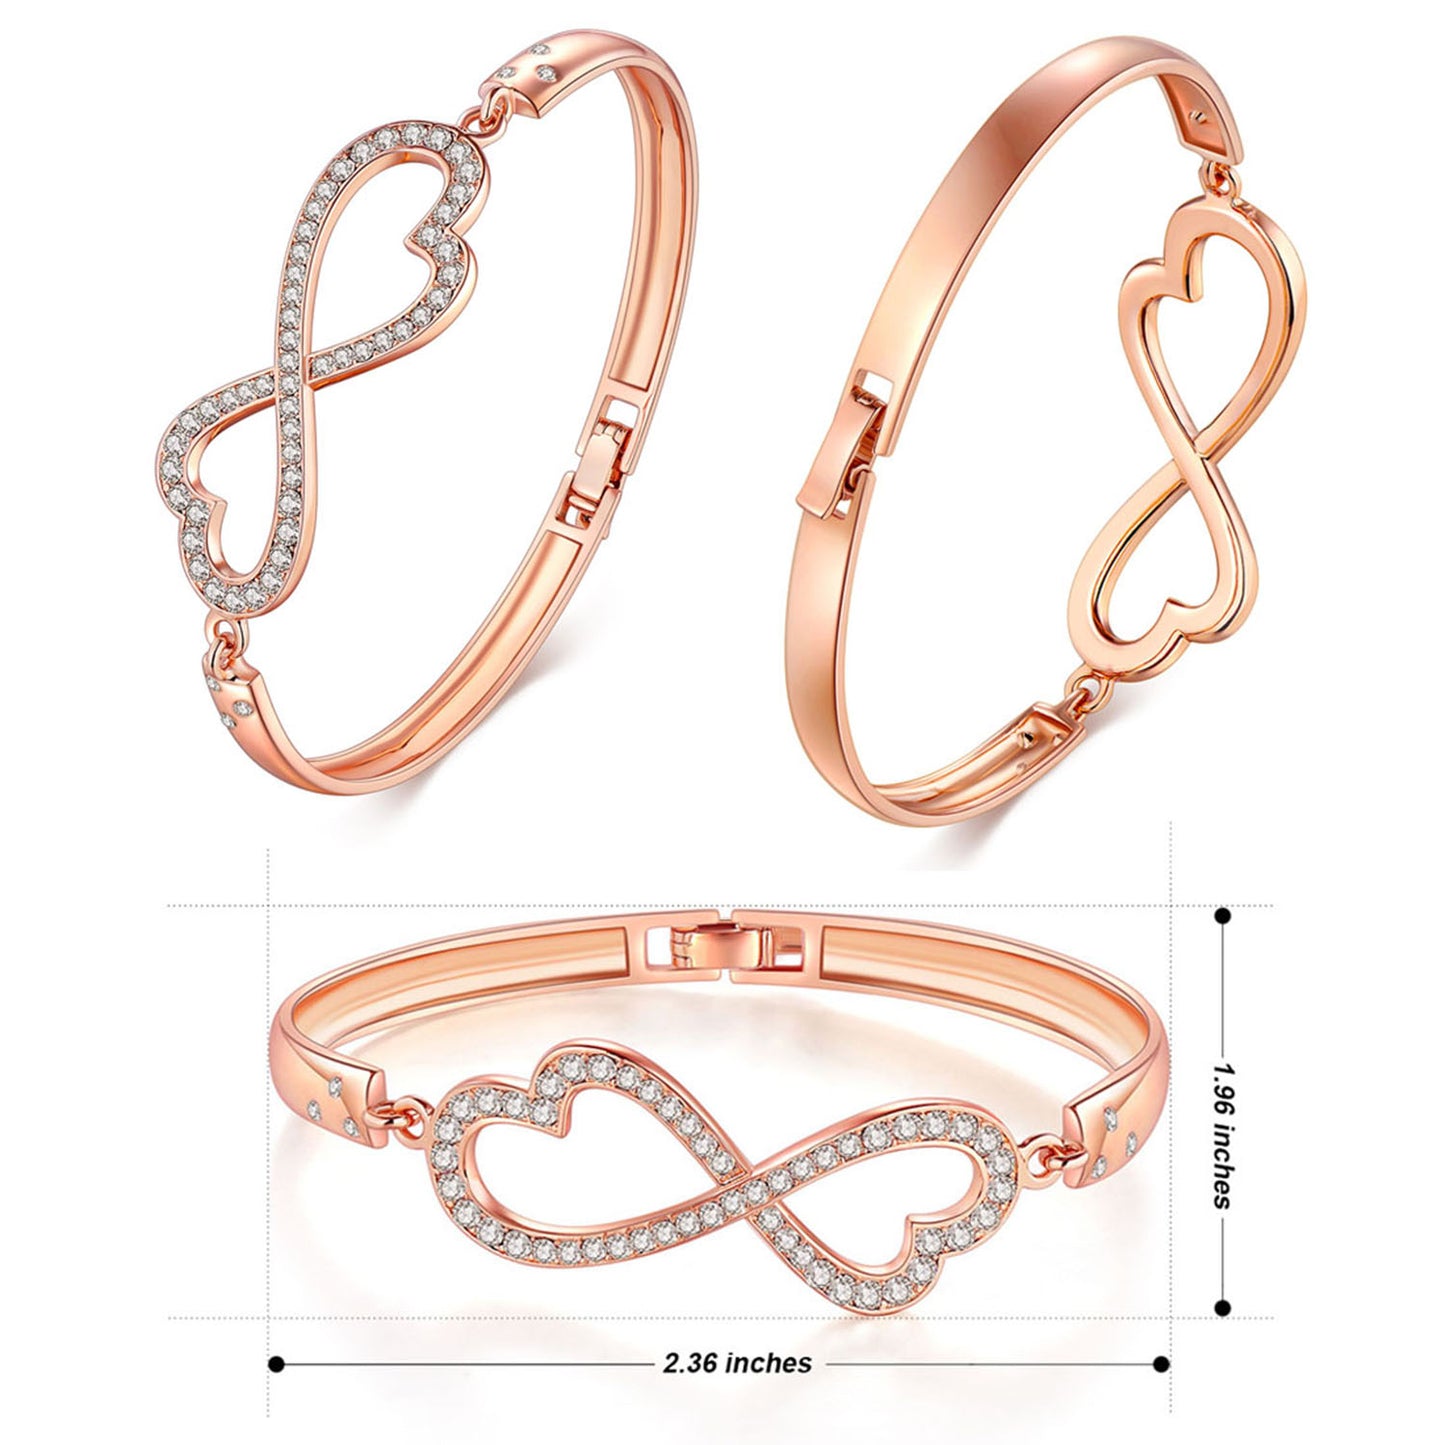 Rose Gold Plated Infinity Love Heart Bracelet made with Crystals